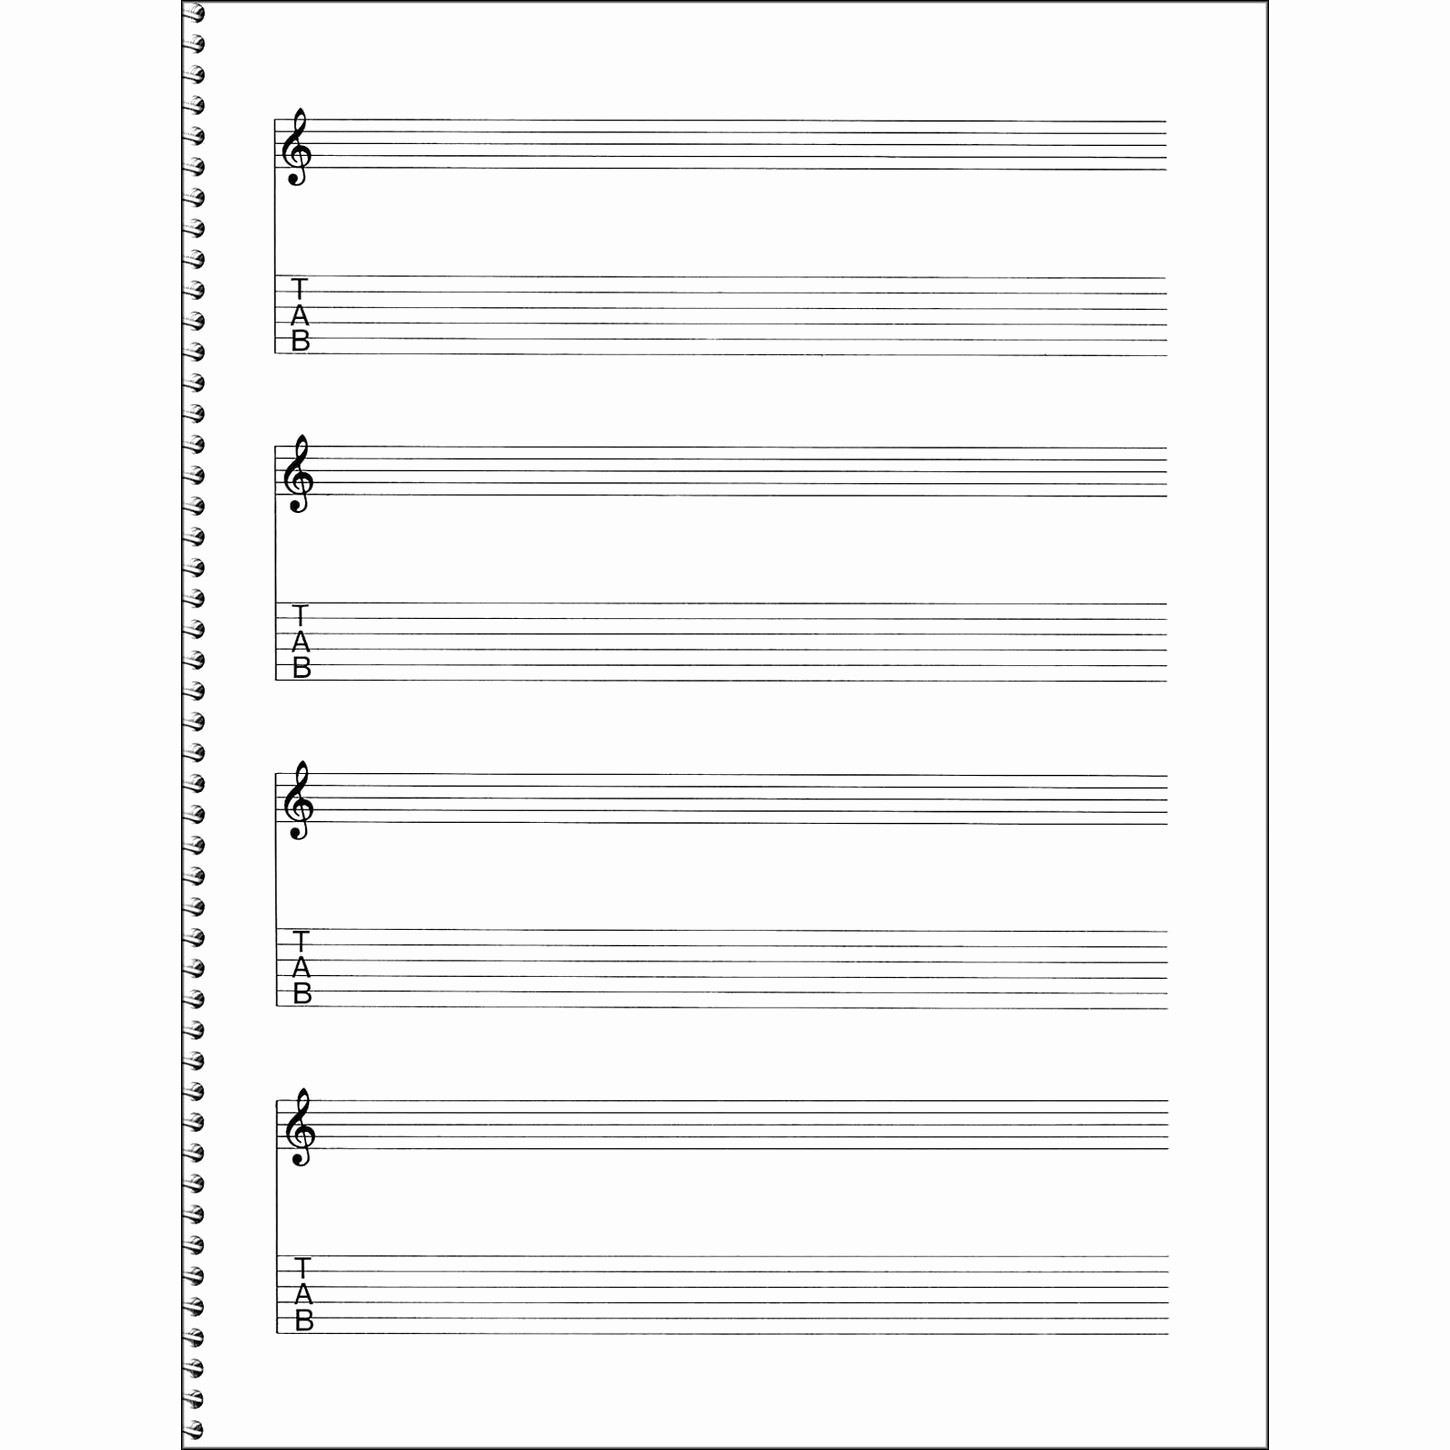 Music Staff Paper with Notes New Music Sales Passantino Guitar Manuscript Paper Spiral Pad